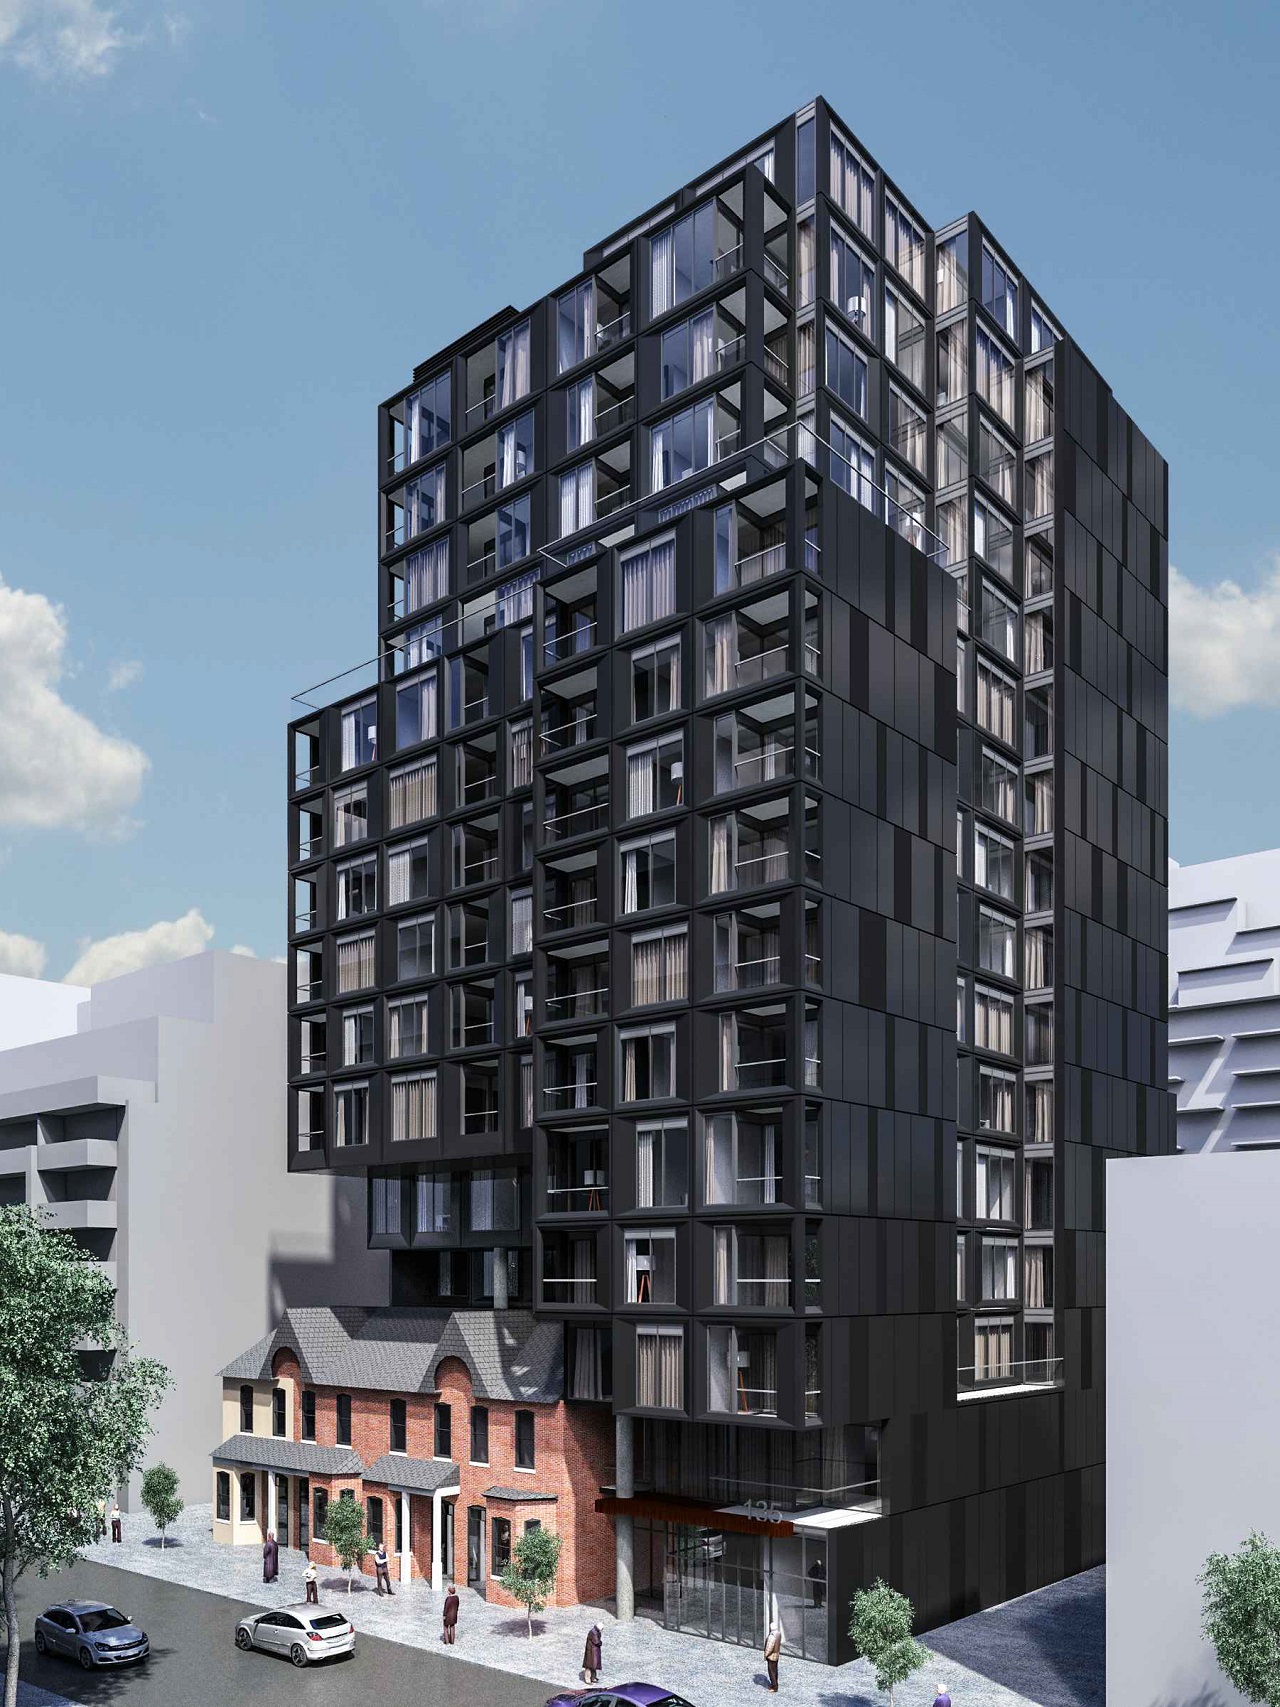 Looking northeast to The Addison Residences at 135 Portland, designed by Core Architects for ADI Development Group